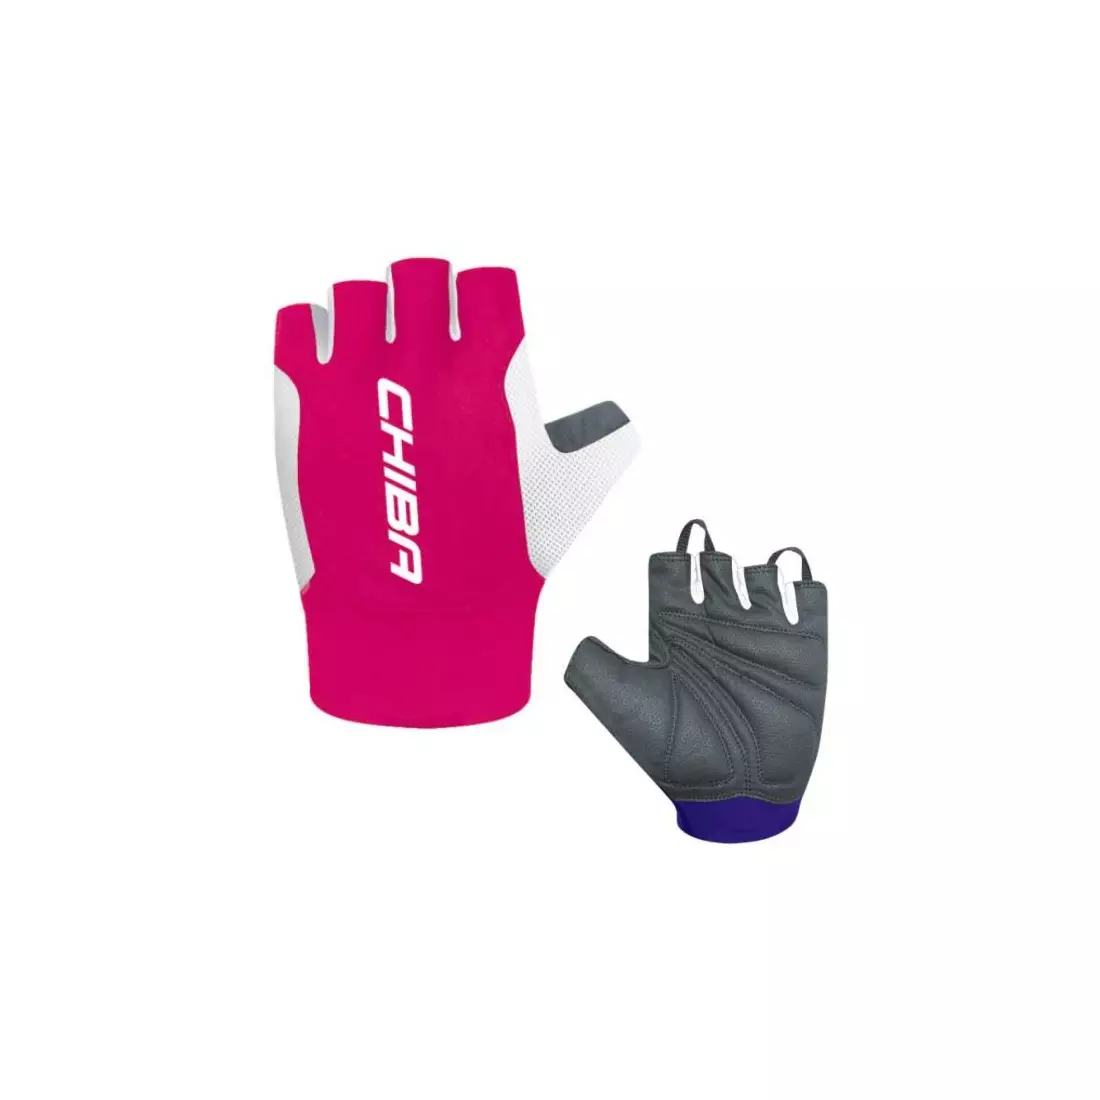 CHIBA road cycling gloves MISTRAL pink 3030420P-2